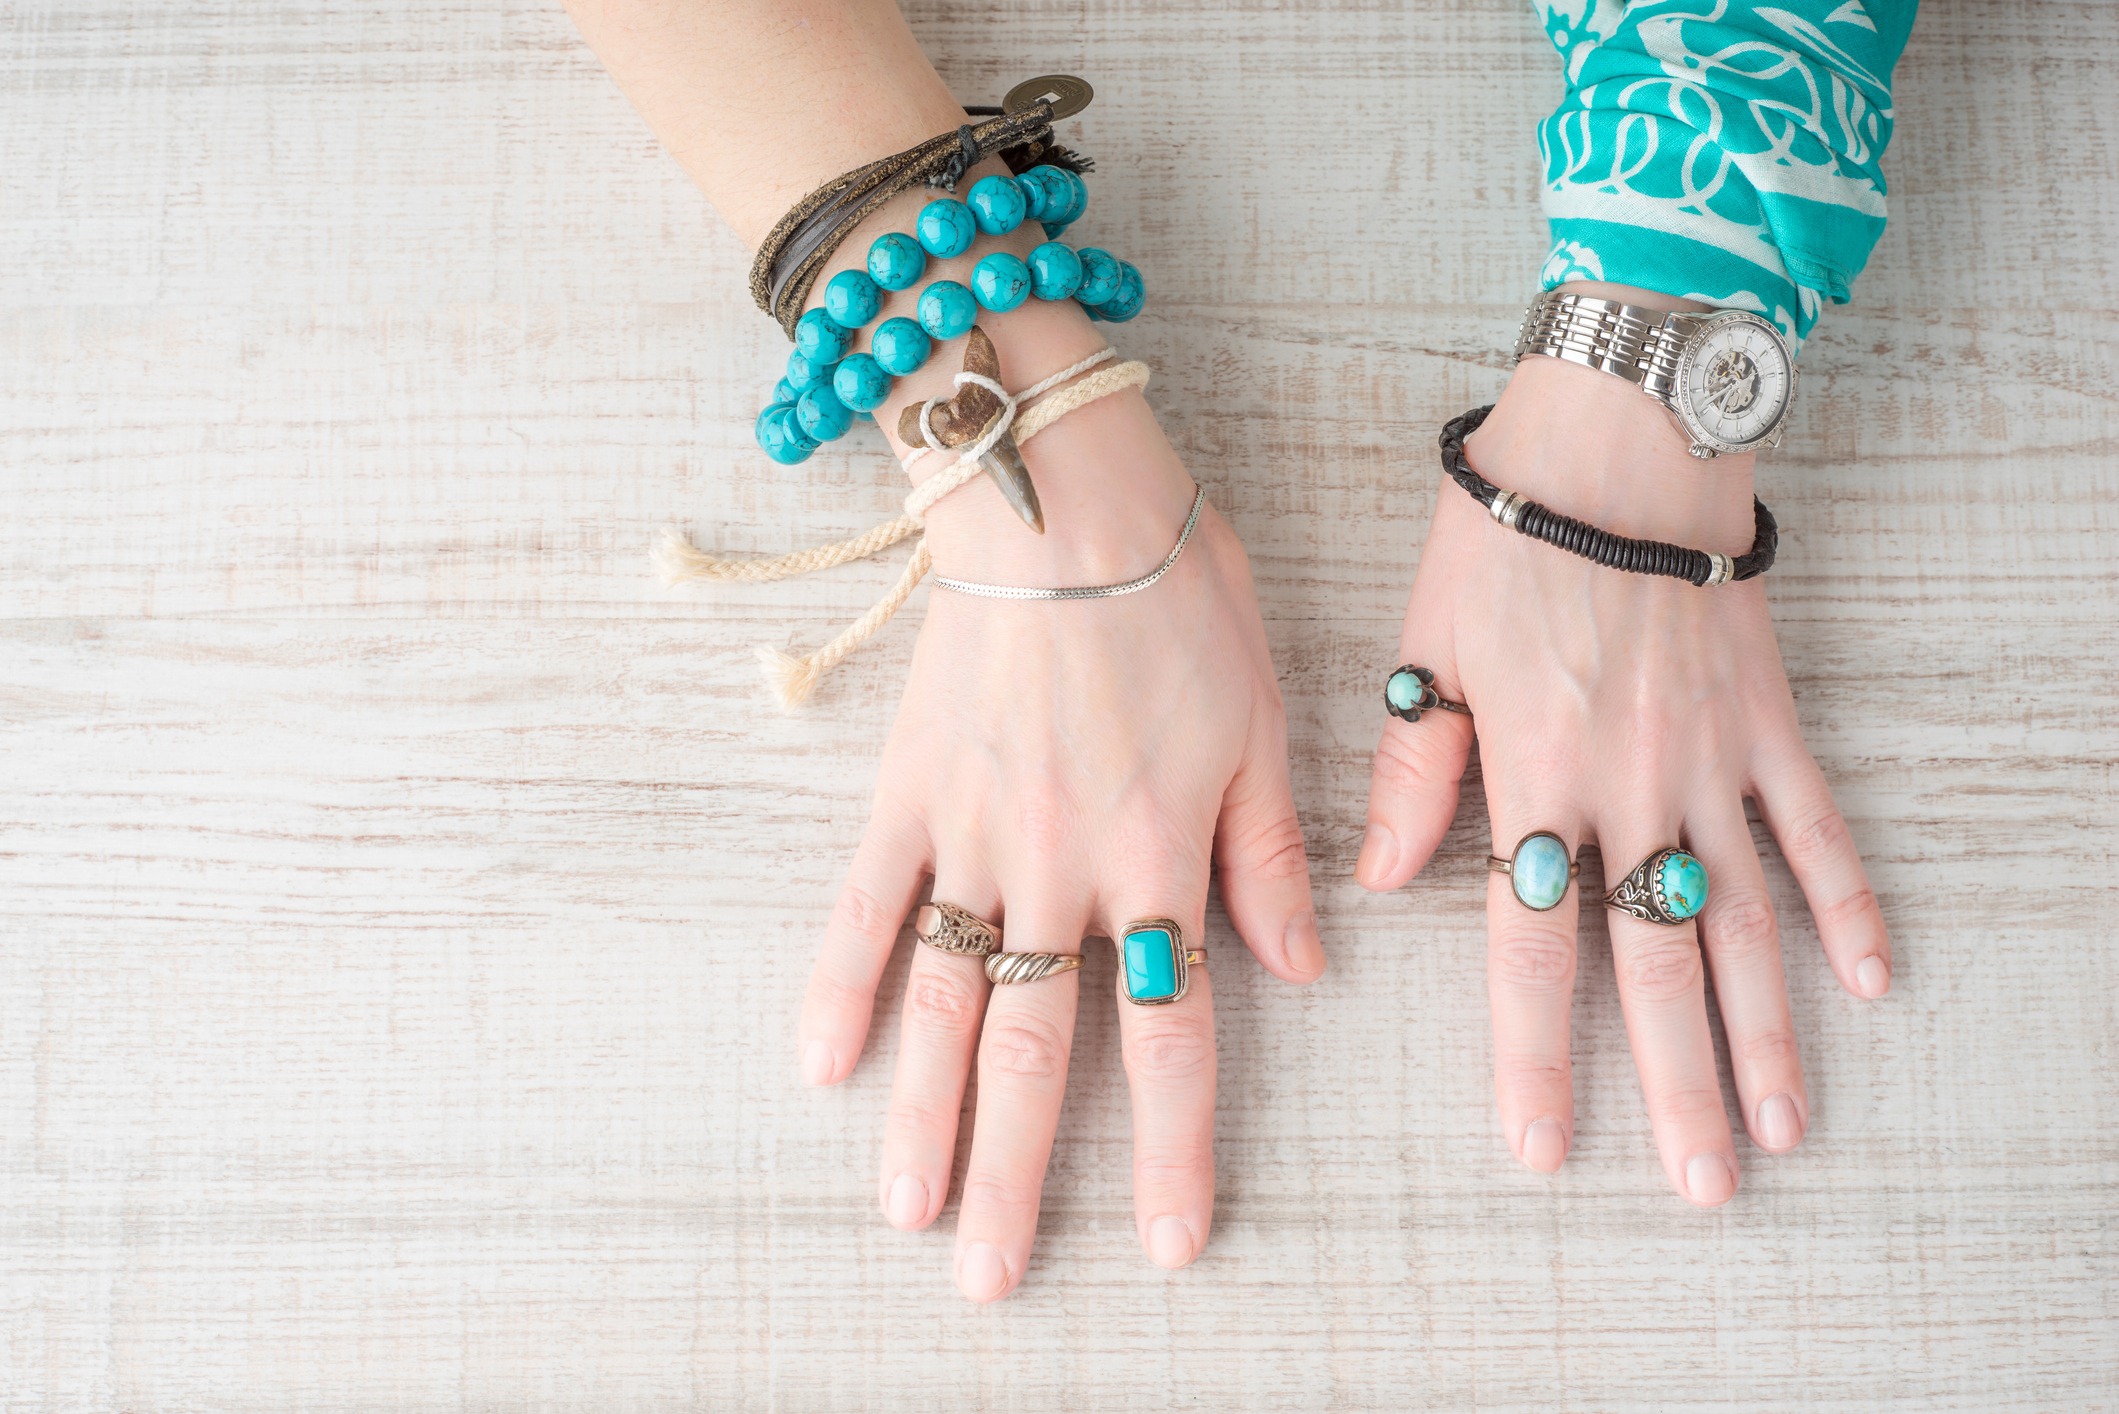 Hands of women in the jewelry of turquoise horizontal